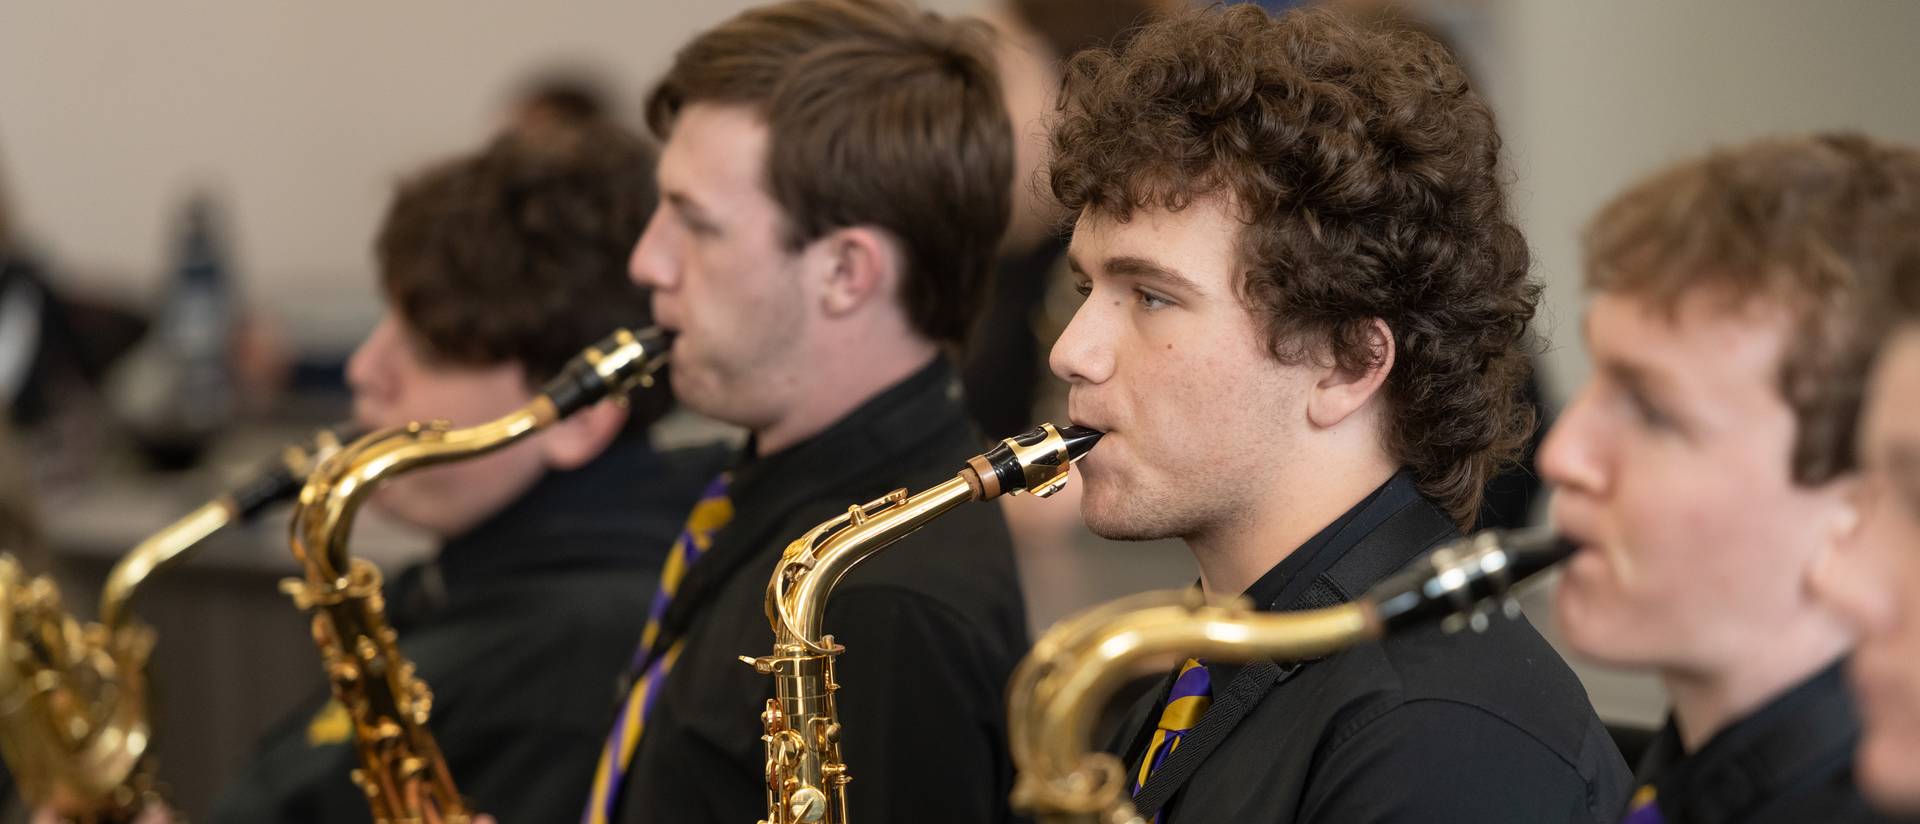 Male students playing saxophone, black shirts with blue and gold ties